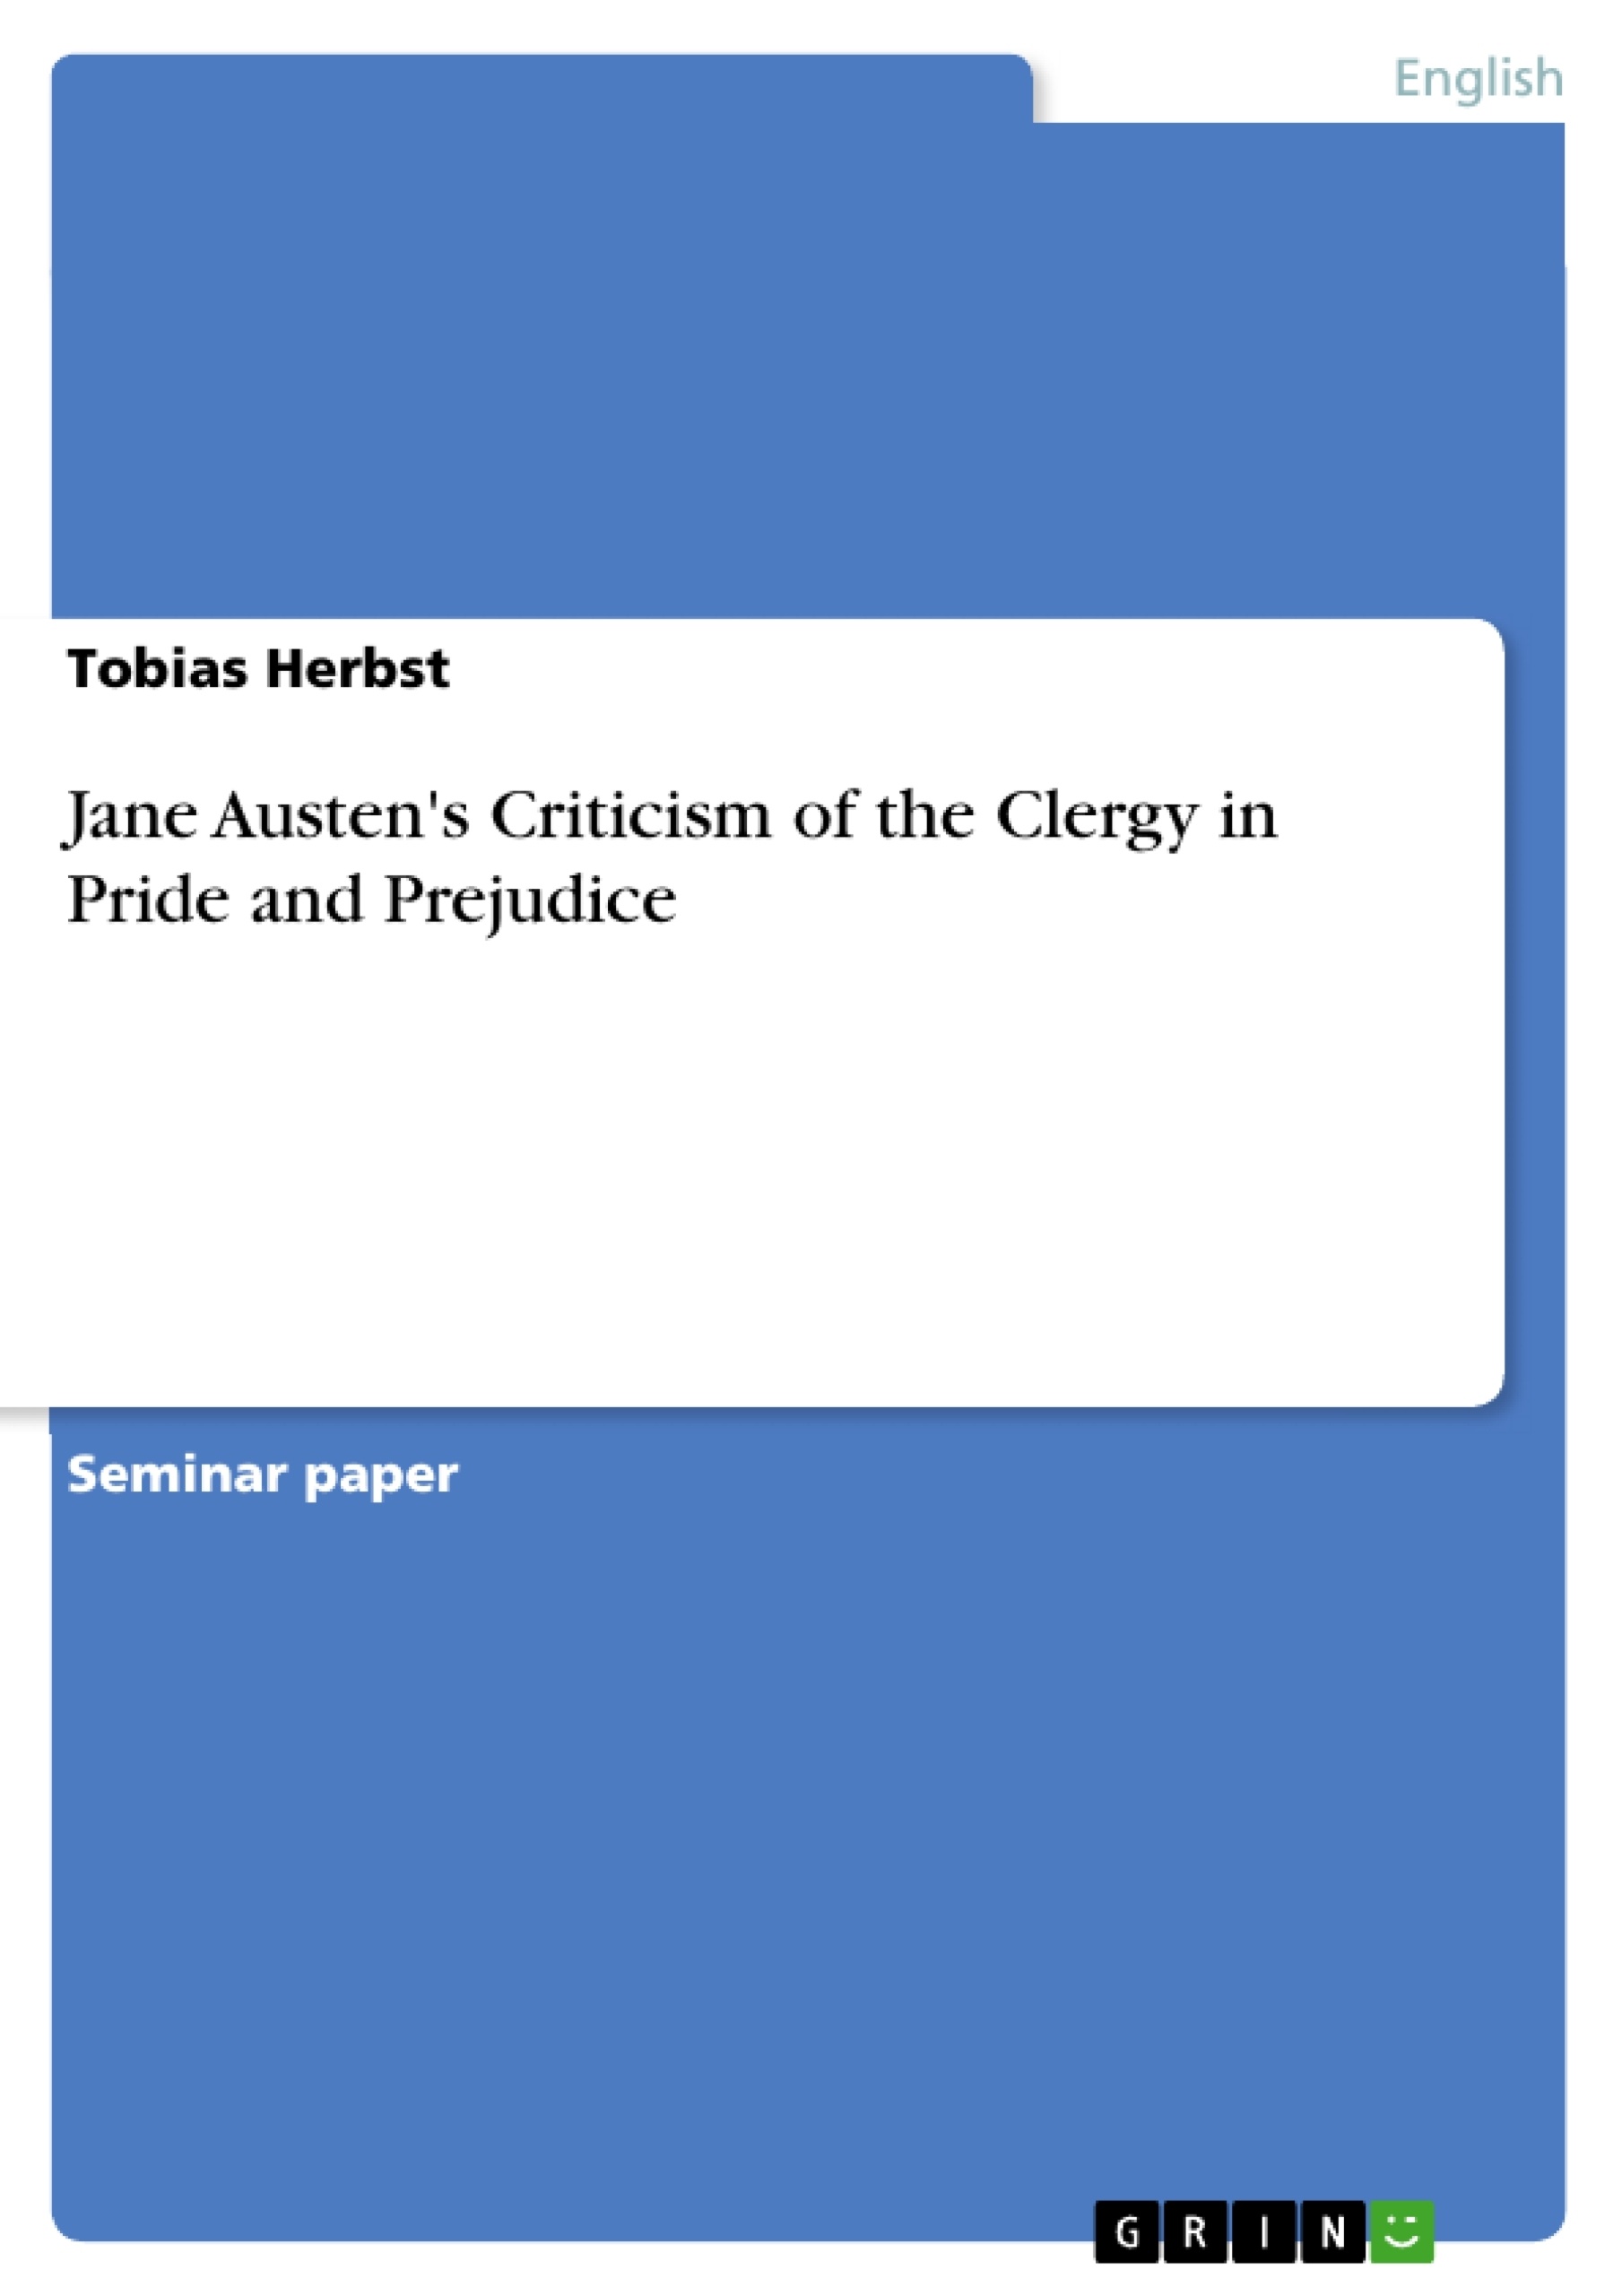 Title: Jane Austen's Criticism of the Clergy in Pride and Prejudice